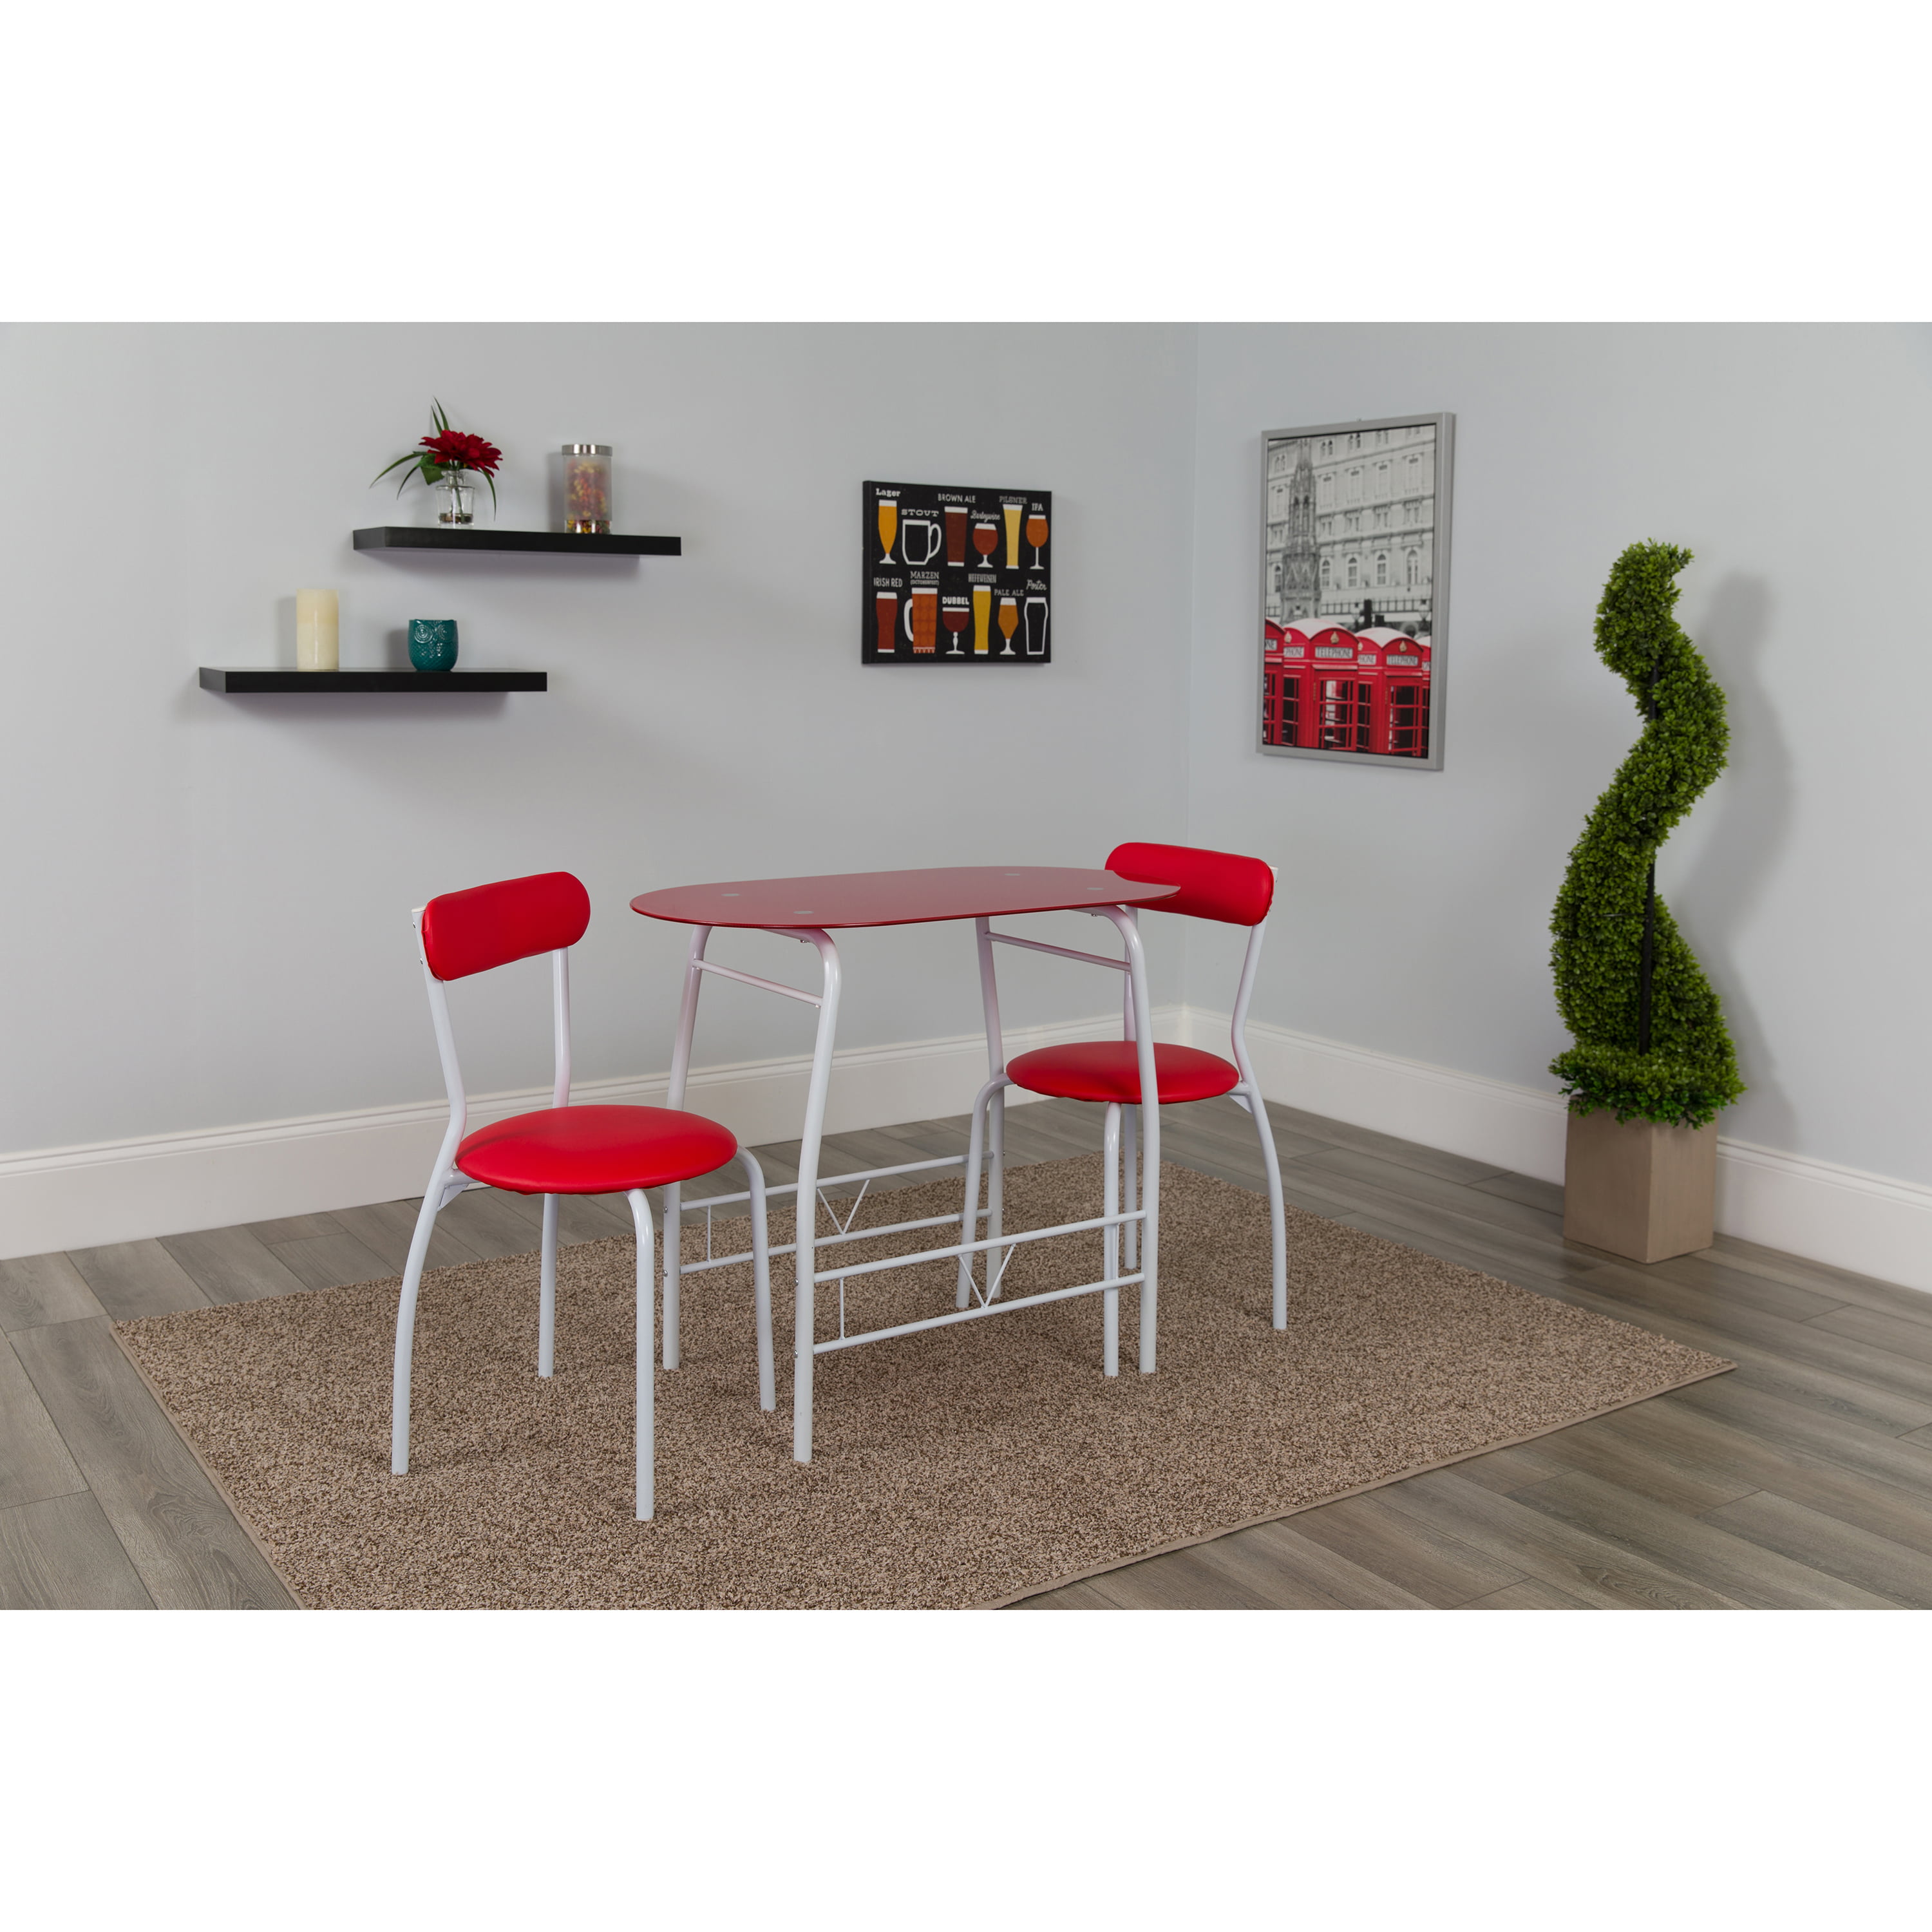 Silver Transitional Glass Table, Glass Dining Table Red Chairs